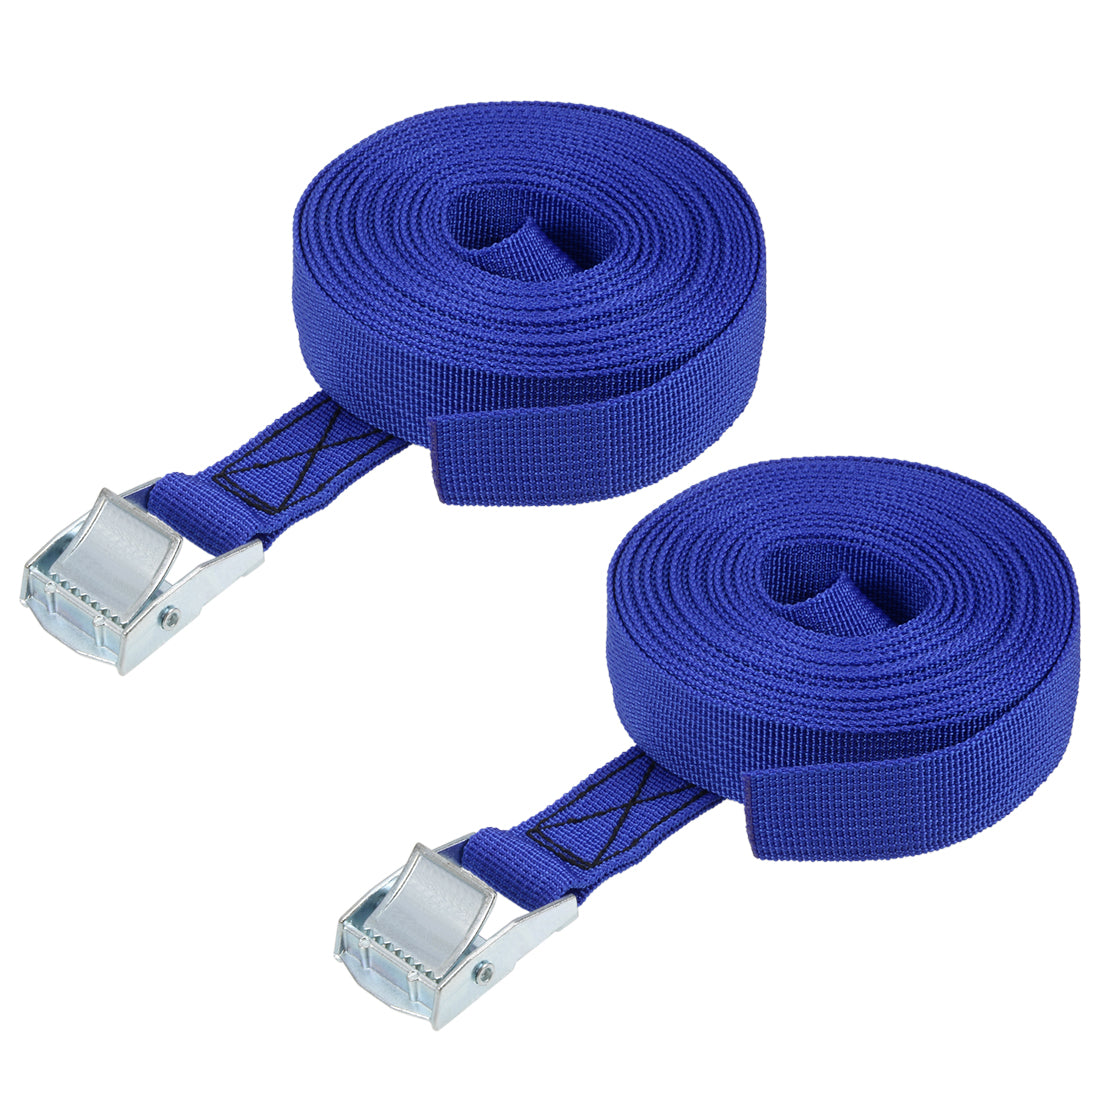 uxcell Uxcell 5.5M x 25mm Lashing Strap Cargo Tie Down Straps w Cam Lock Buckle 250Kg Work Load, Blue, 2Pcs